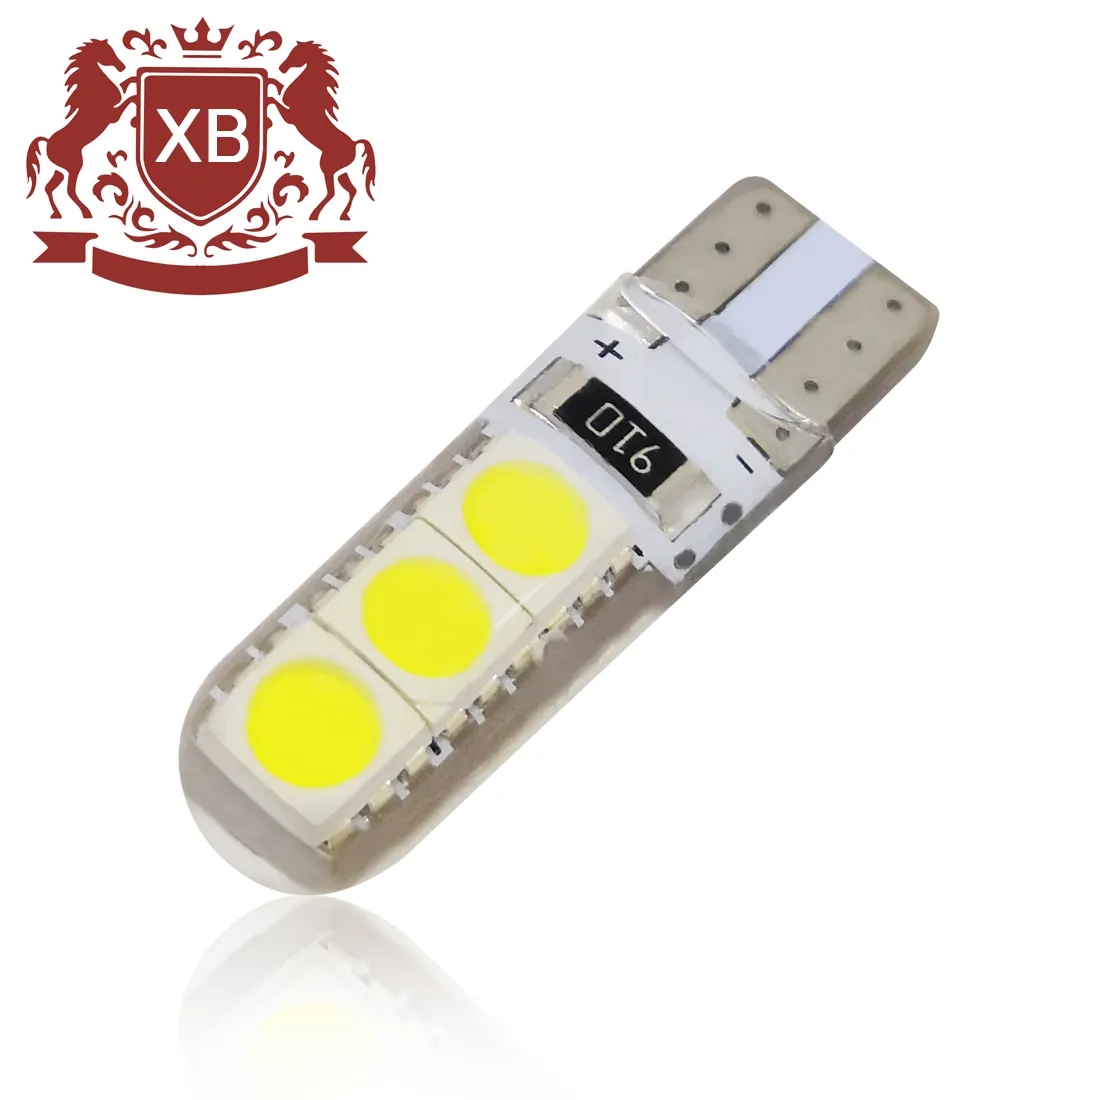 Perfect LED T10 socket 194 W5W Canbus 6SMD 5050 Silicone car led width light No Error auto reading lamp bulb 12 volt